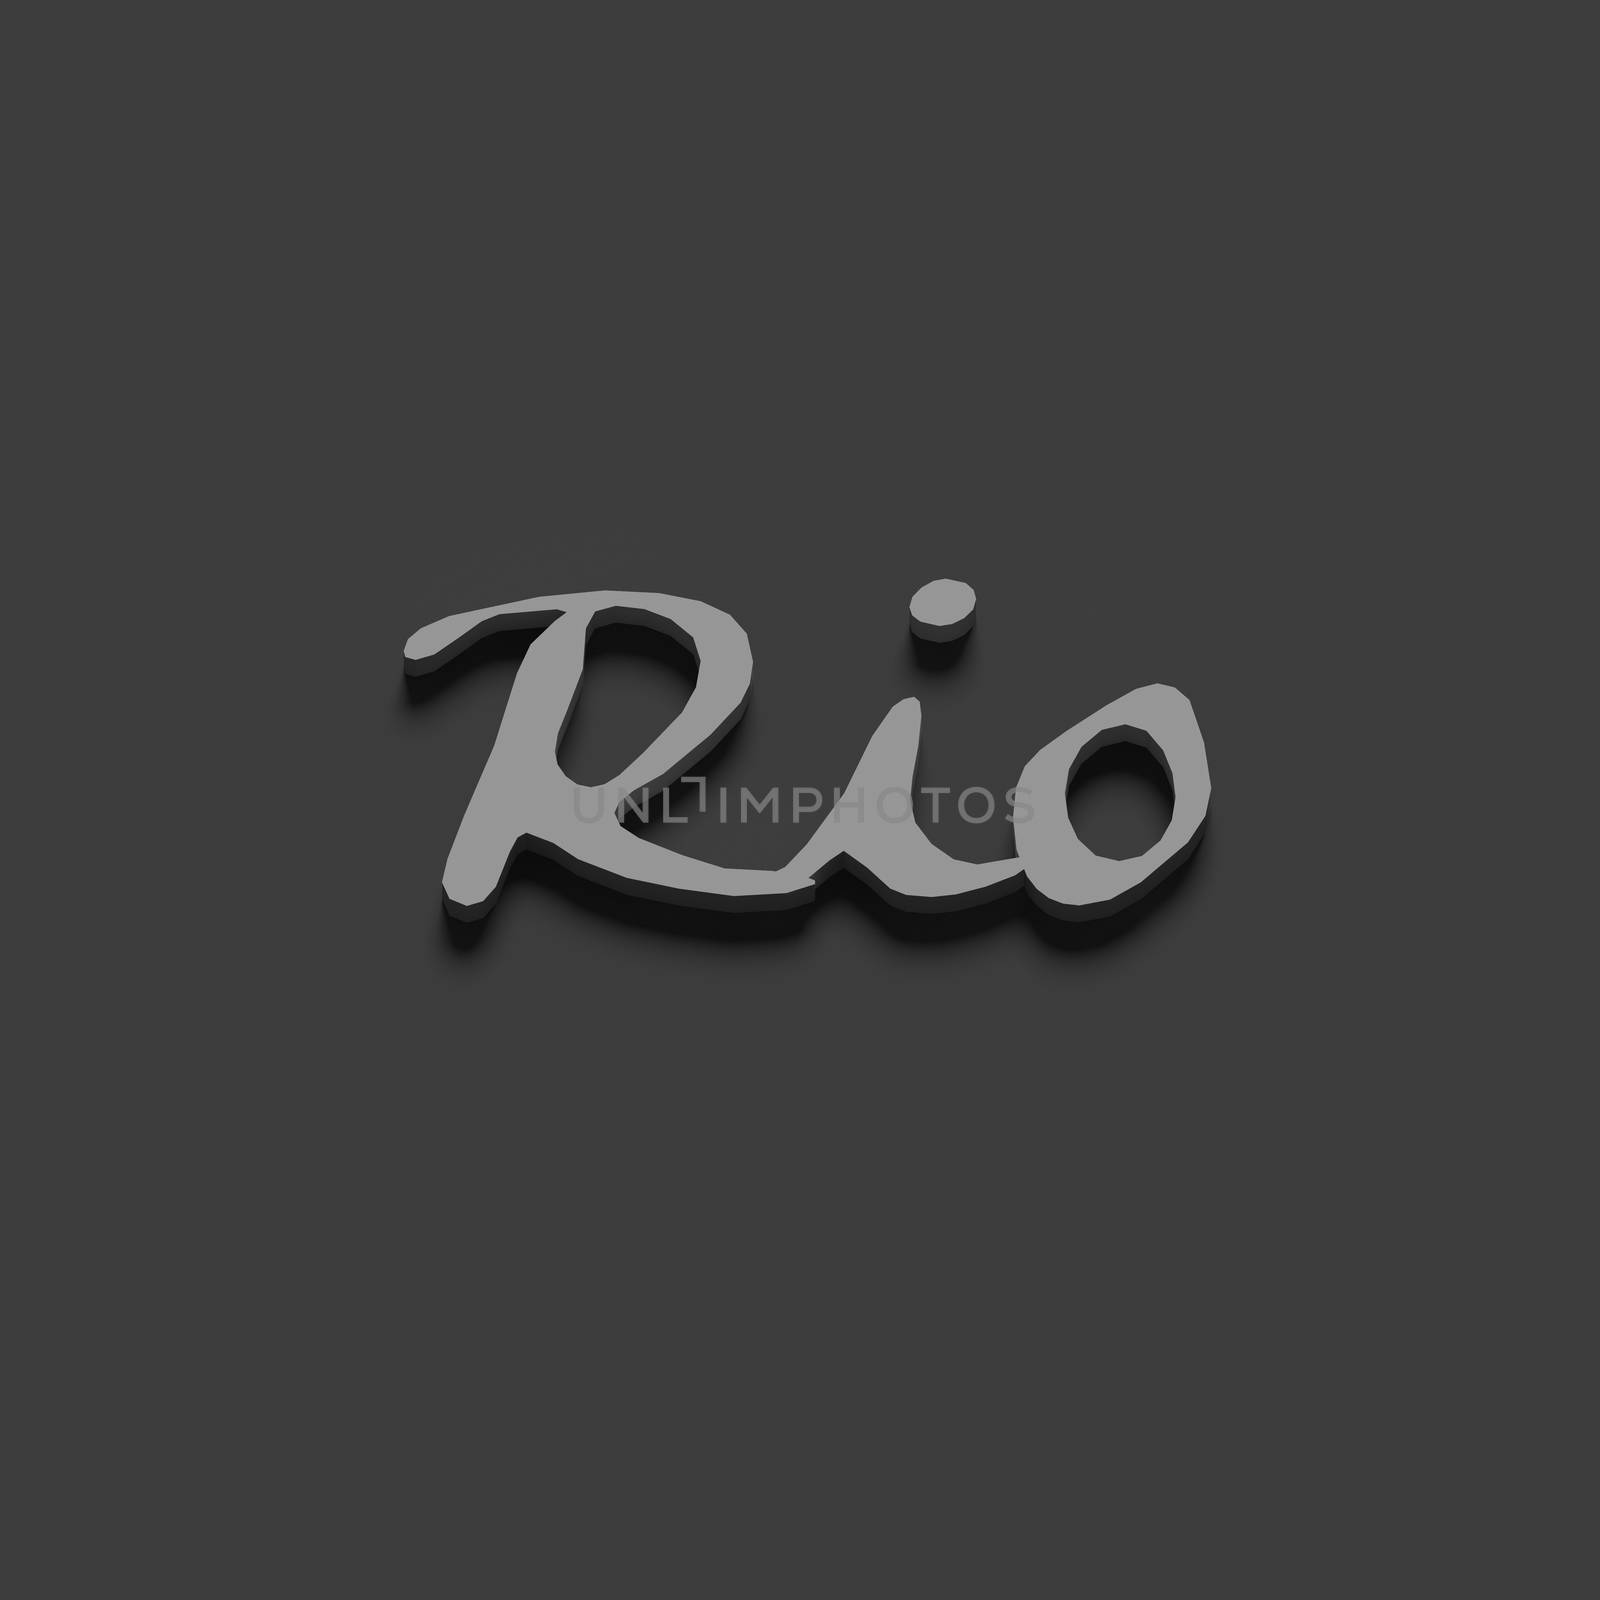 3D RENDERING WORDS 'RIO' ON PLAIN BACKGROUND by PrettyTG